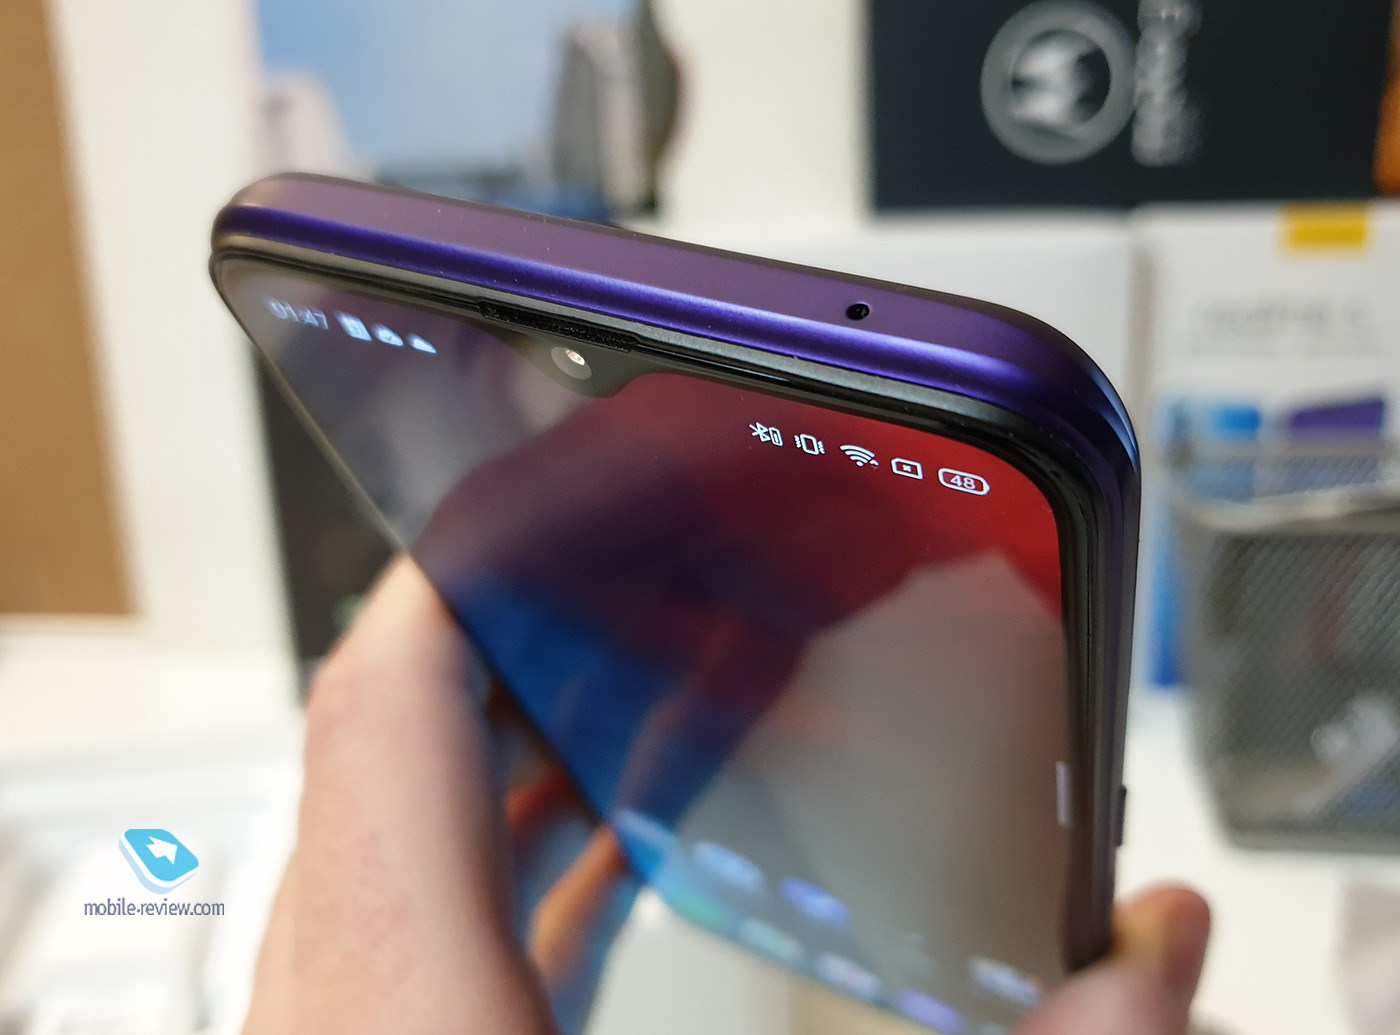 Realme 5 Pro review: a smartphone for 12 rubles breathes into the back of the head of photo flags